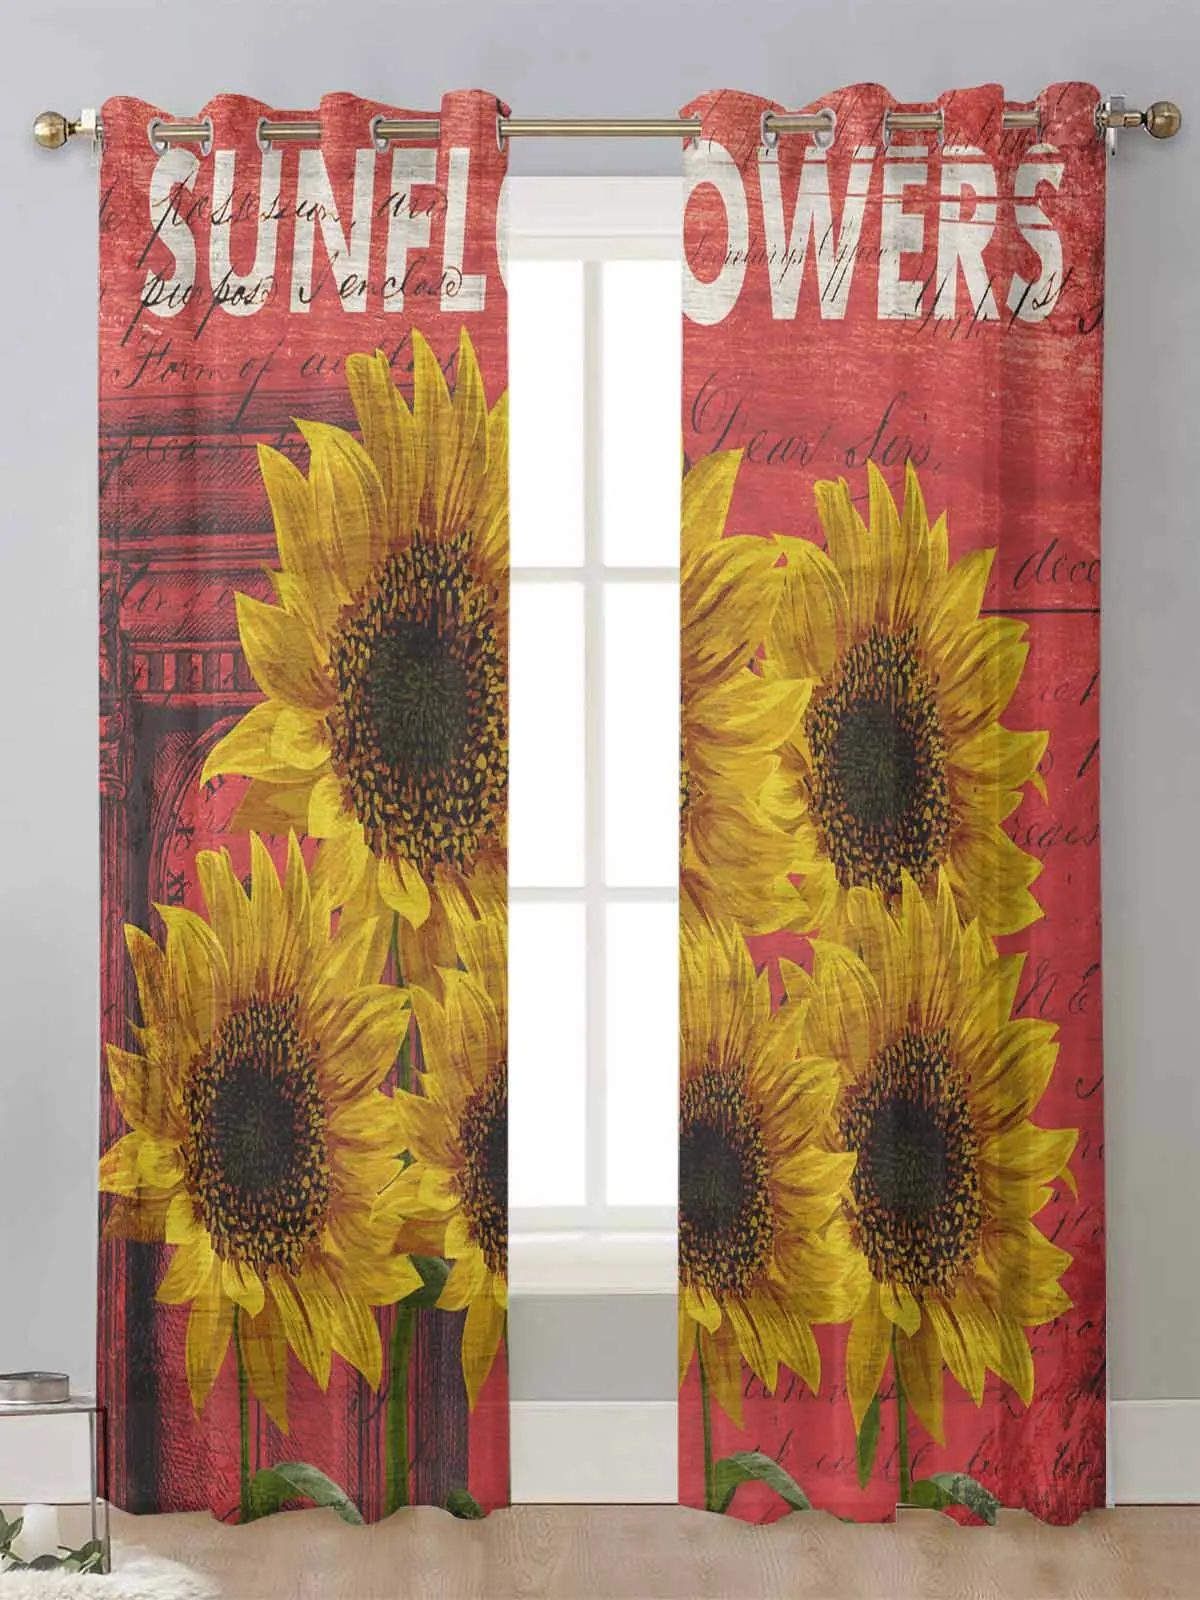 

Sunflower Wood Grain Retro Farm Sheer Curtains For Living Room Window Transparent Voile Tulle Curtain Cortinas Drapes Home Decor